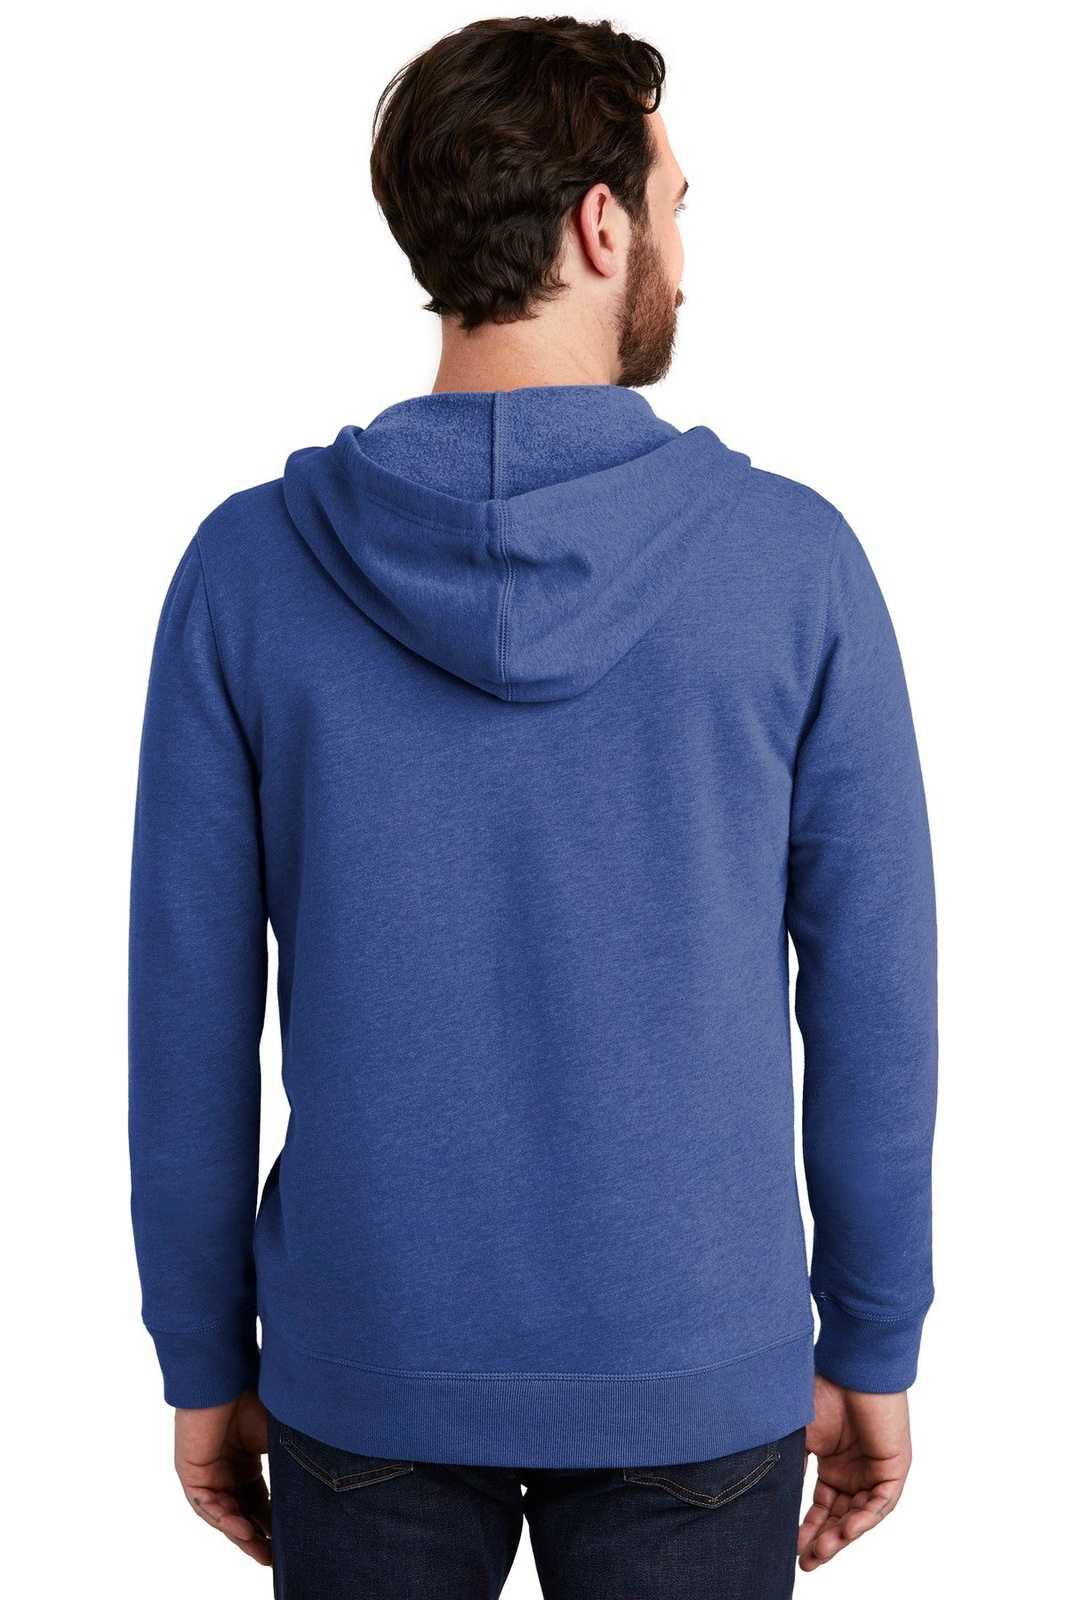 Alternative AA8050 Indy Blended Fleece Zip Hoodie - Heather Rich Royal - HIT a Double - 2